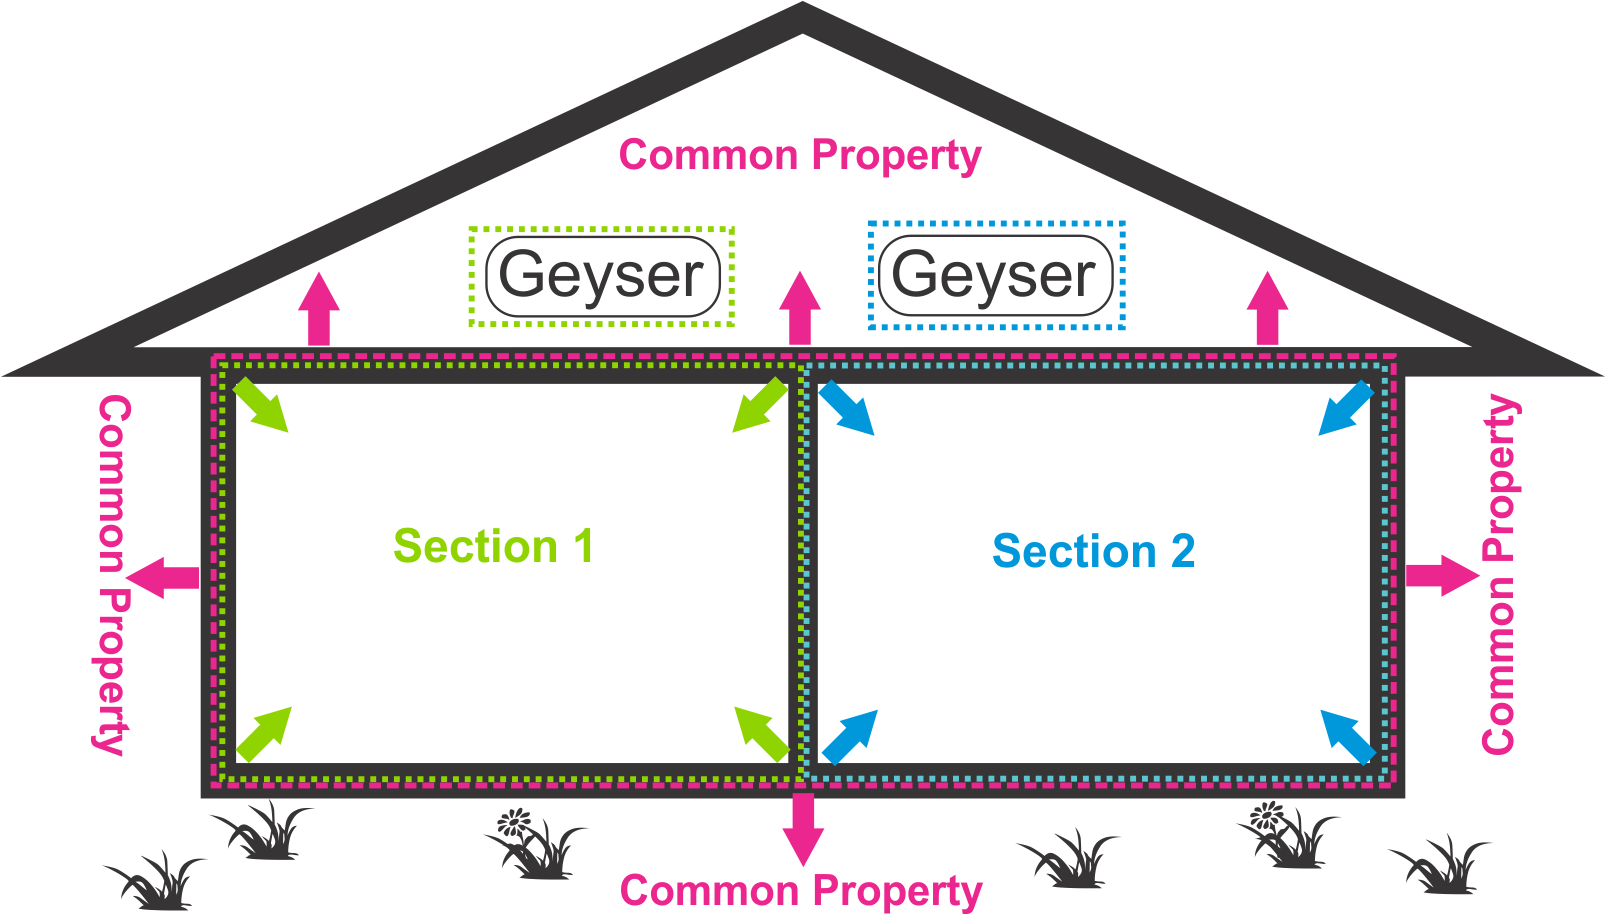 Defining the section and the common property